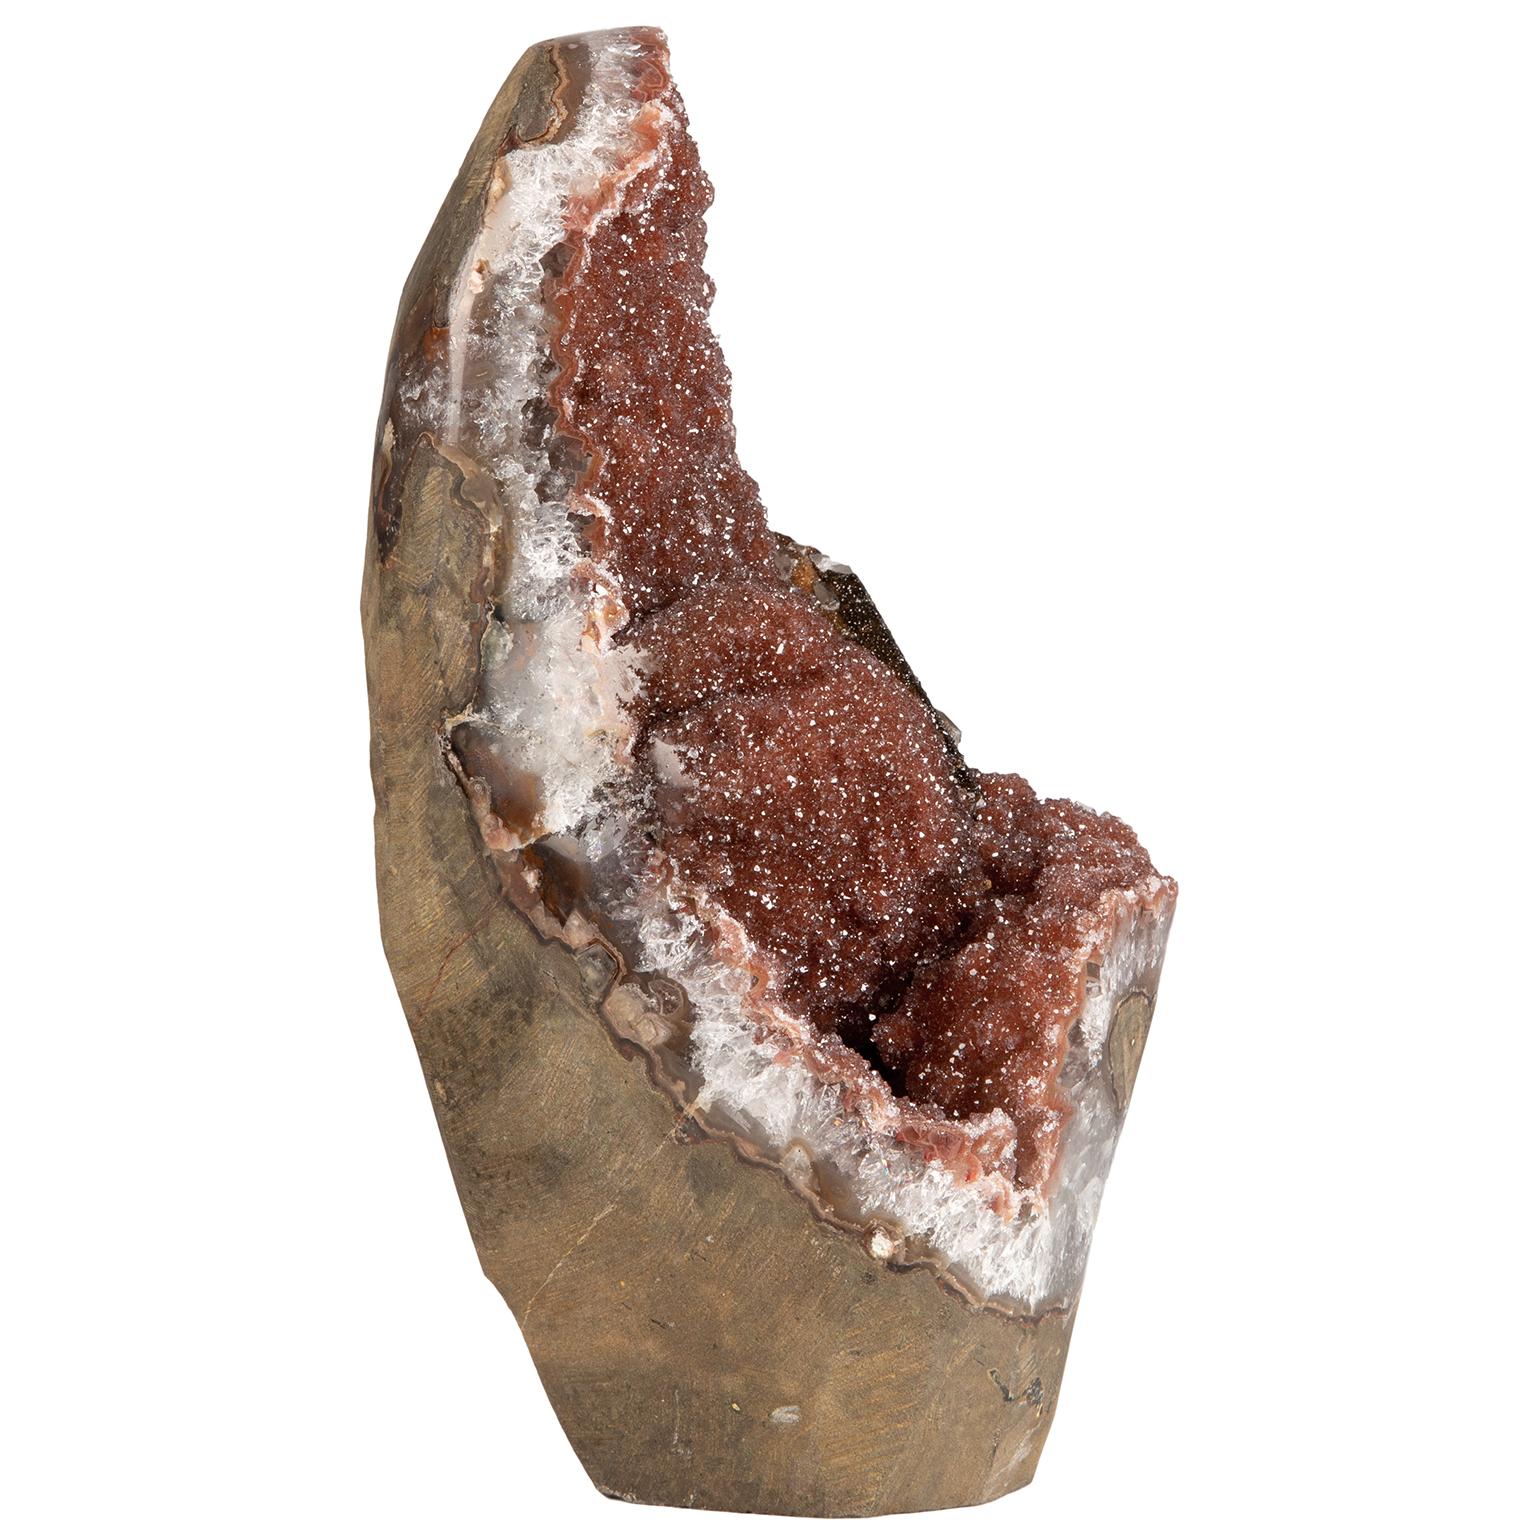 A very unusual and stunning formation with of a mix of minerals and beautiful fusion of colors.

This freestanding piece conserves part of the original geode and it is still possible to appreciate the basalt to the side and at the back in its